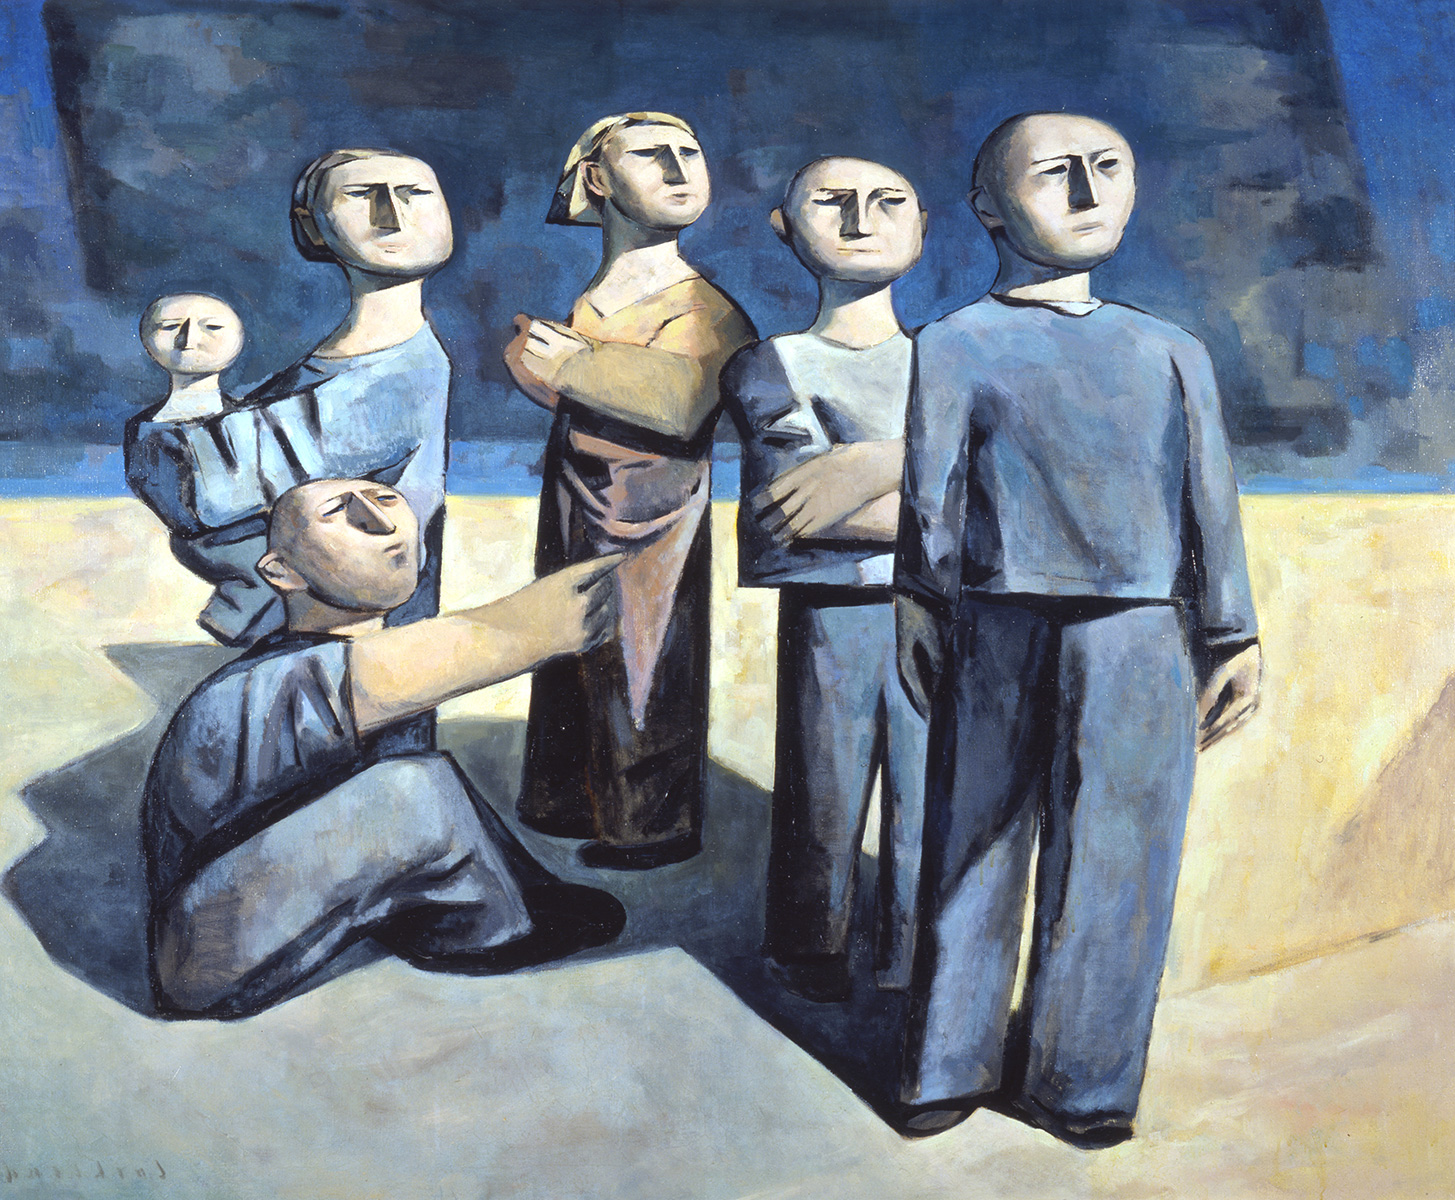 Painting of several figures, short and blocky with no hair, looking up and to the right. All but one are wearing plain blue shirts and pants, with serious looks on their identical faces.